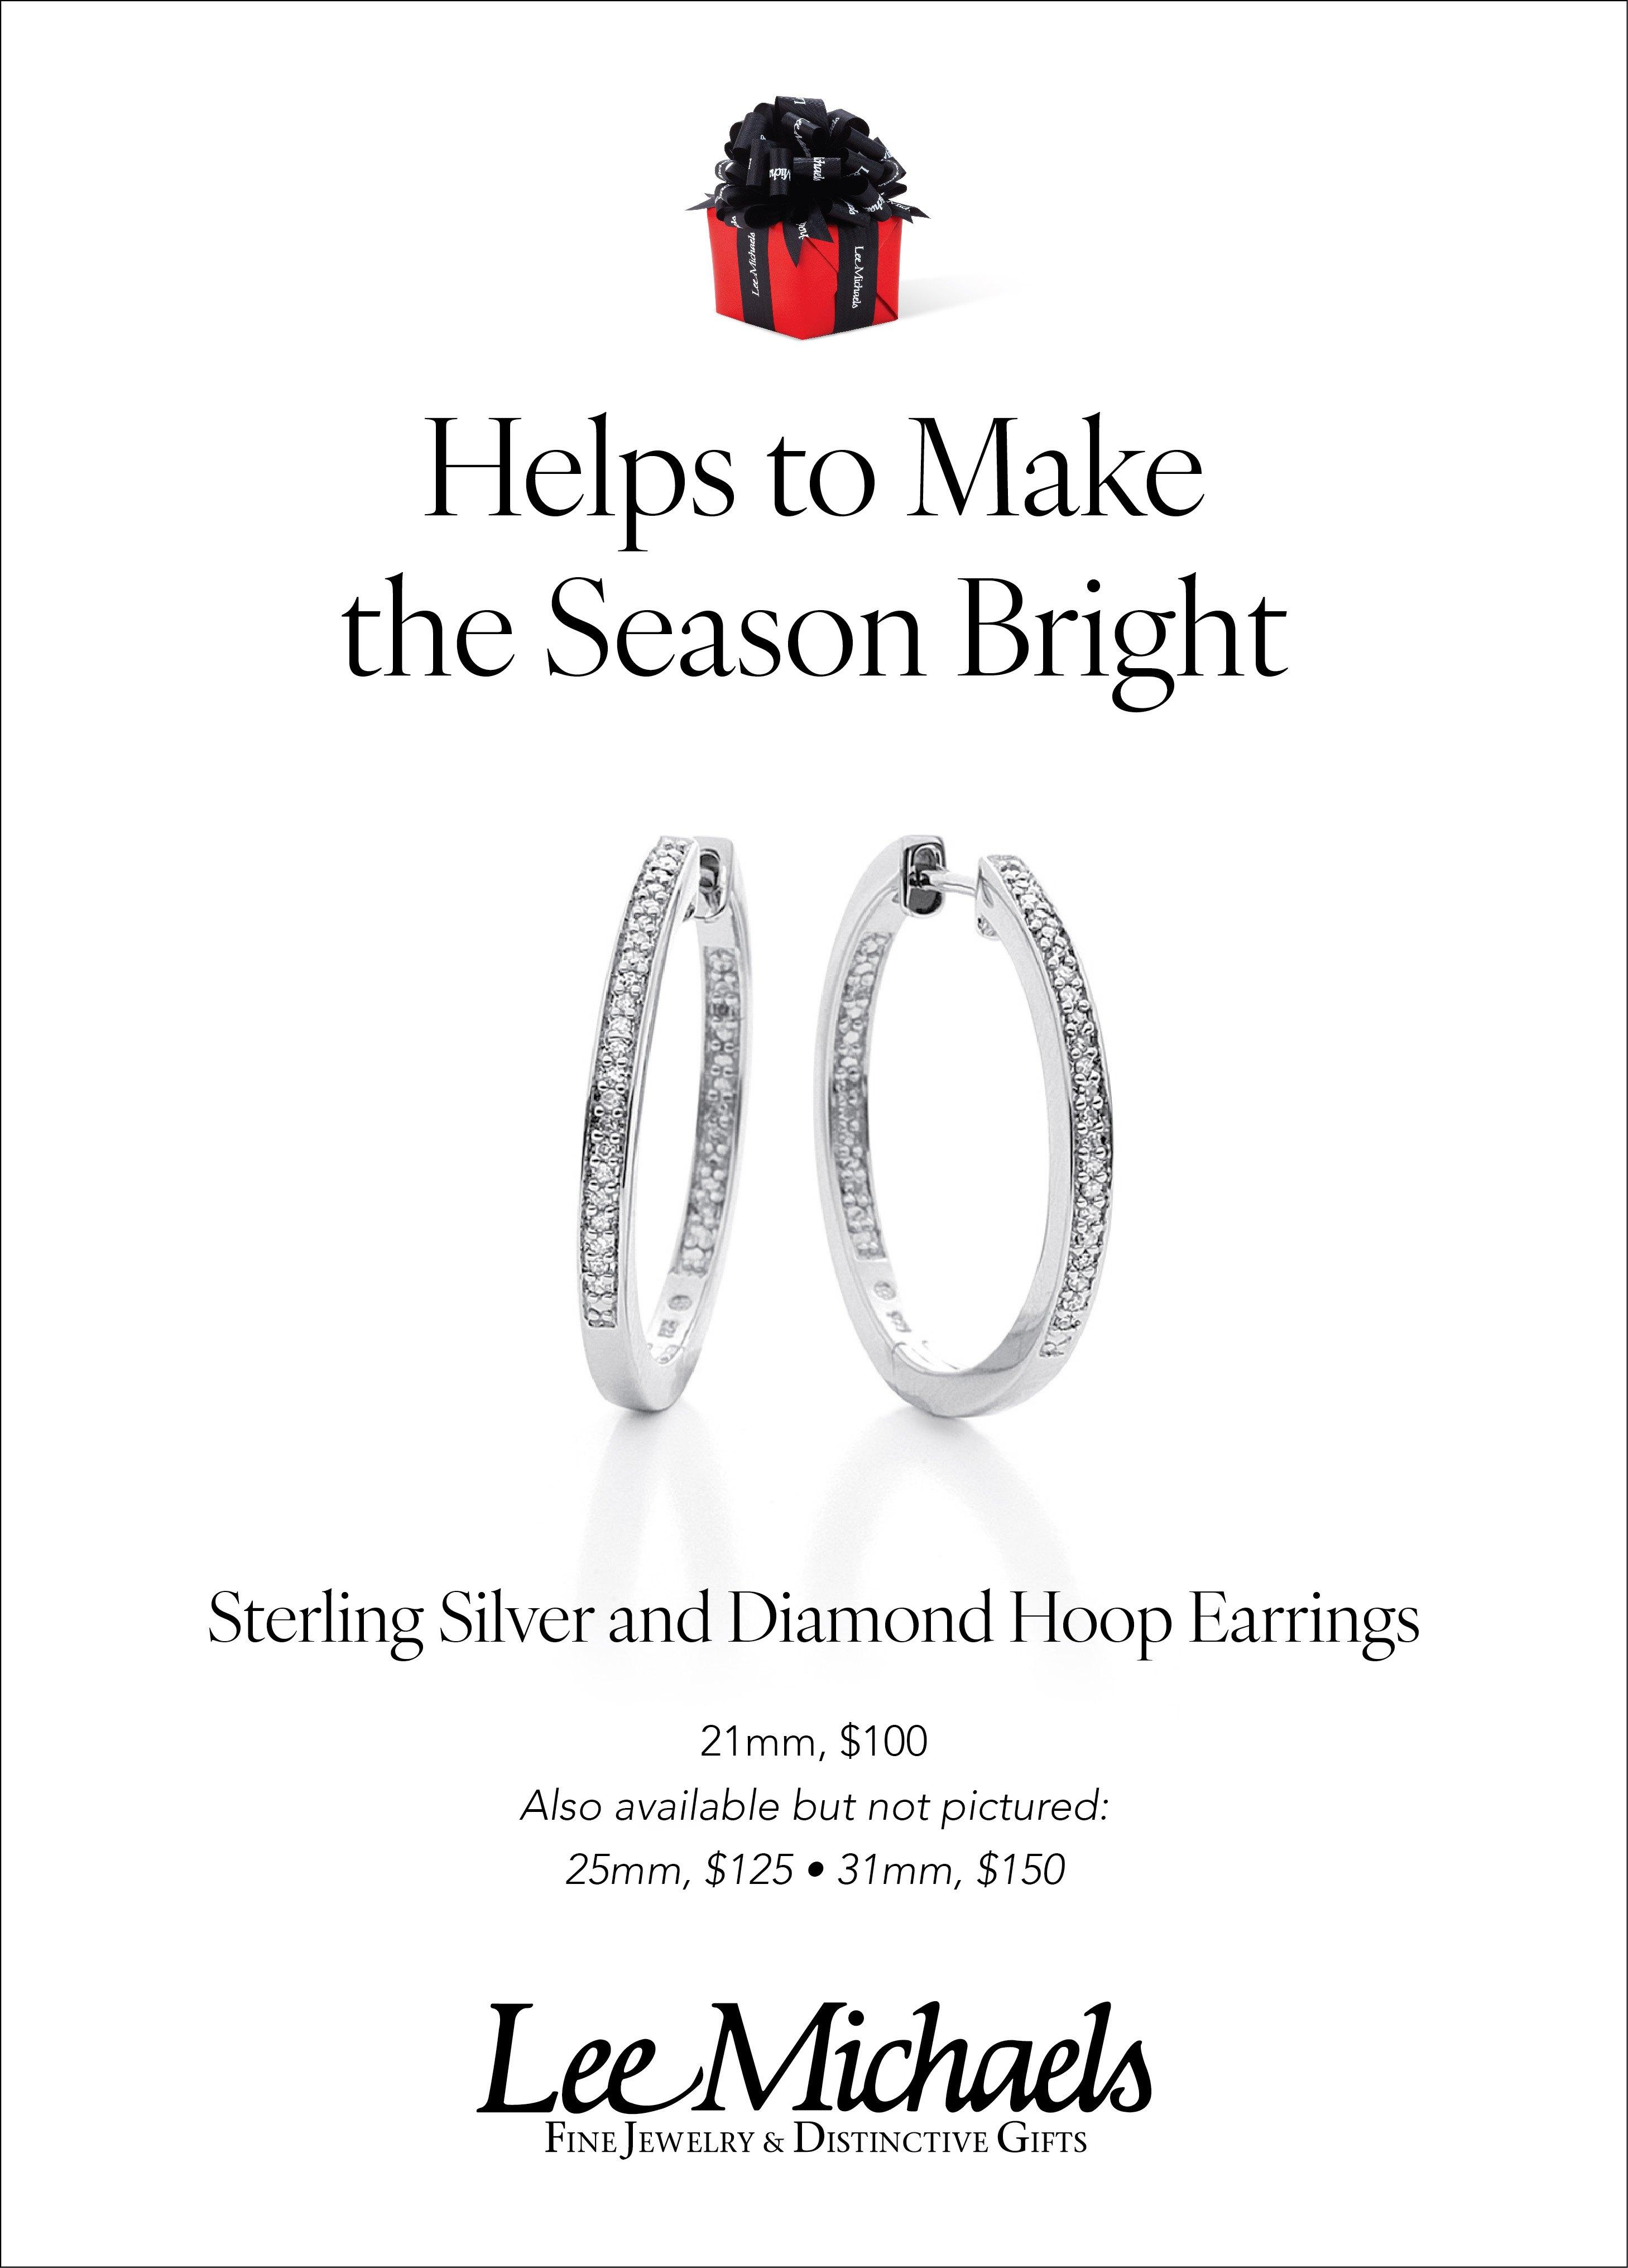 Advertised Silver and Diamond Hoops for $100, Holiday 2023